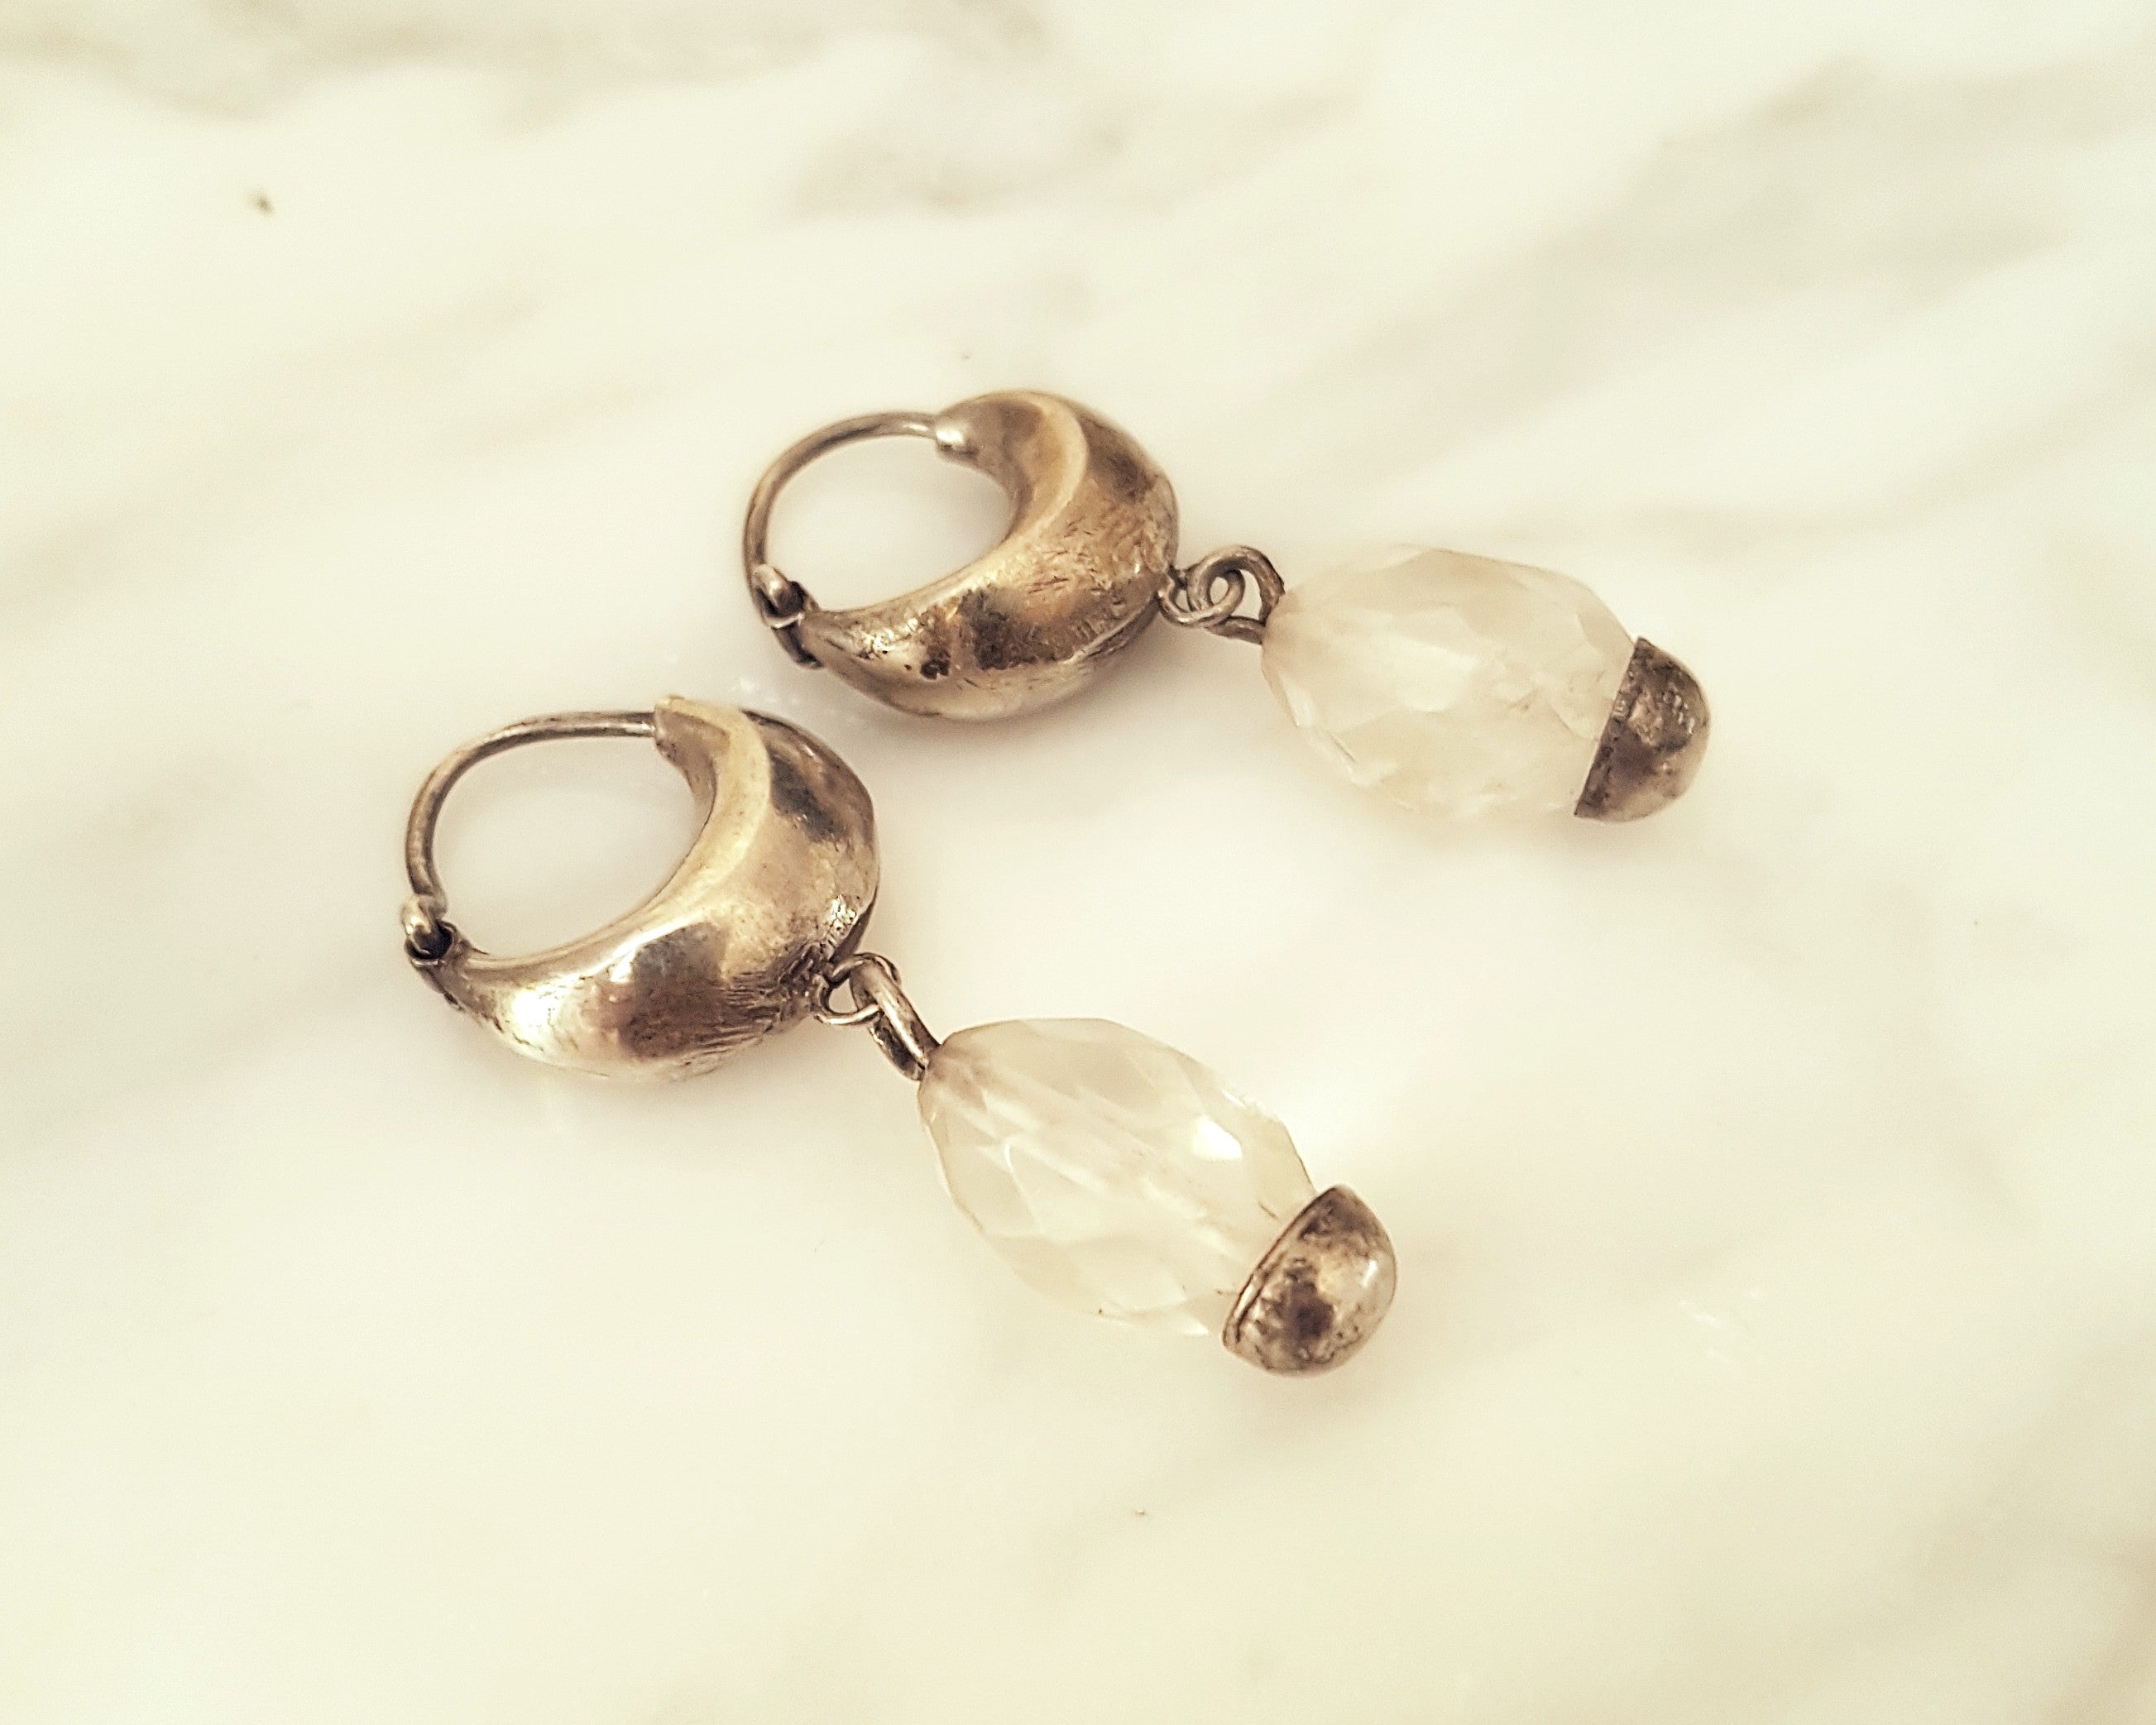 Reserved for L. - Ethnic Hoop Earrings with Crystal Quartz Dangles